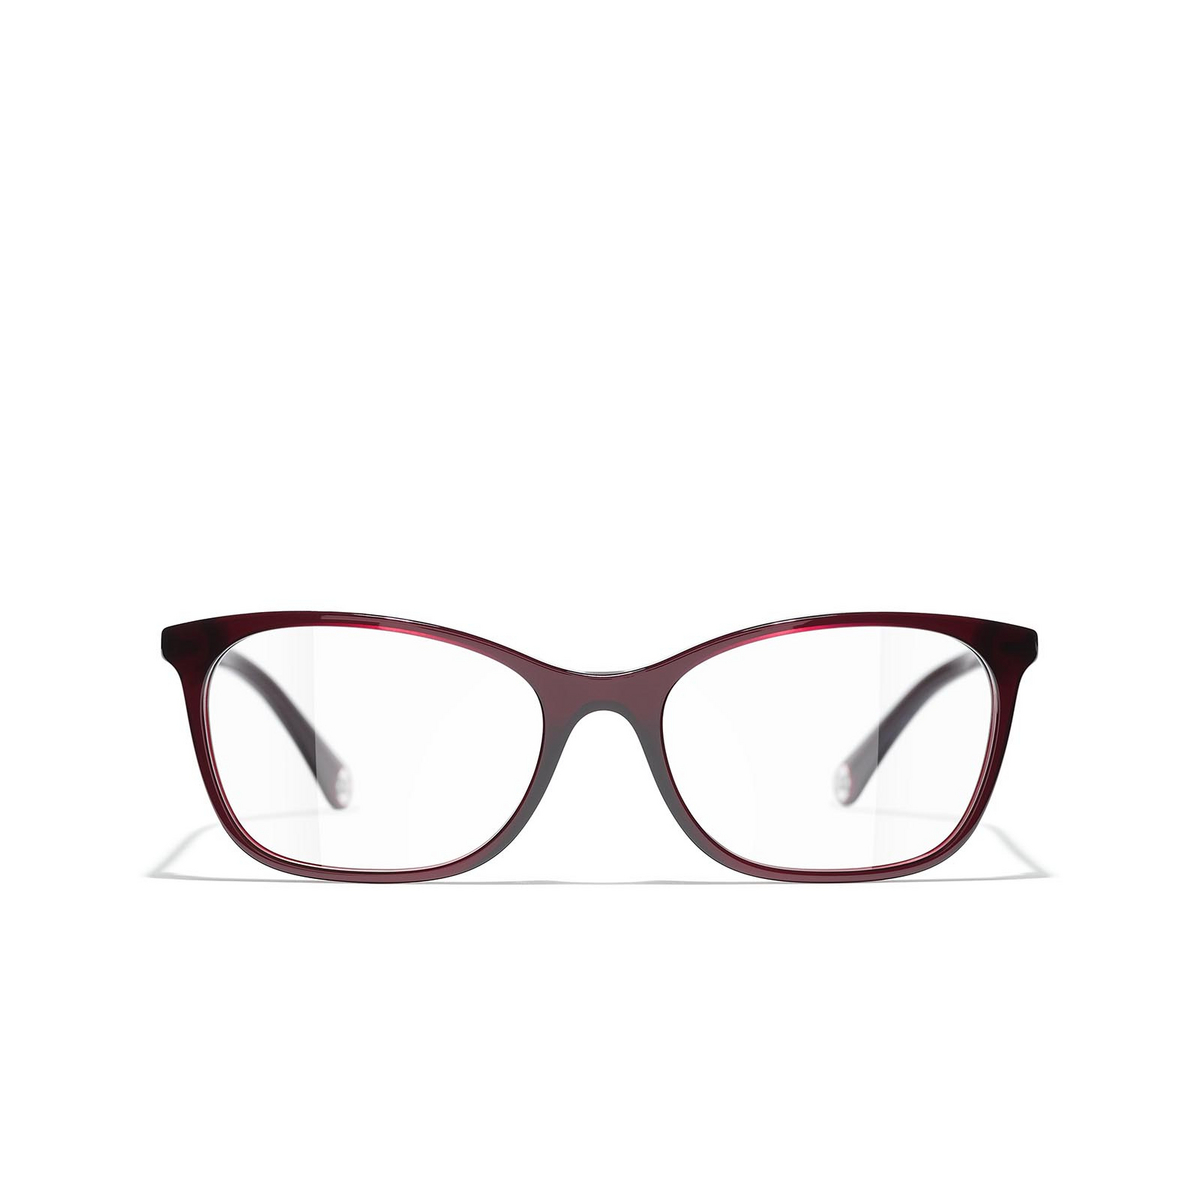 CHANEL rectangle Eyeglasses 1673 Dark Red - front view